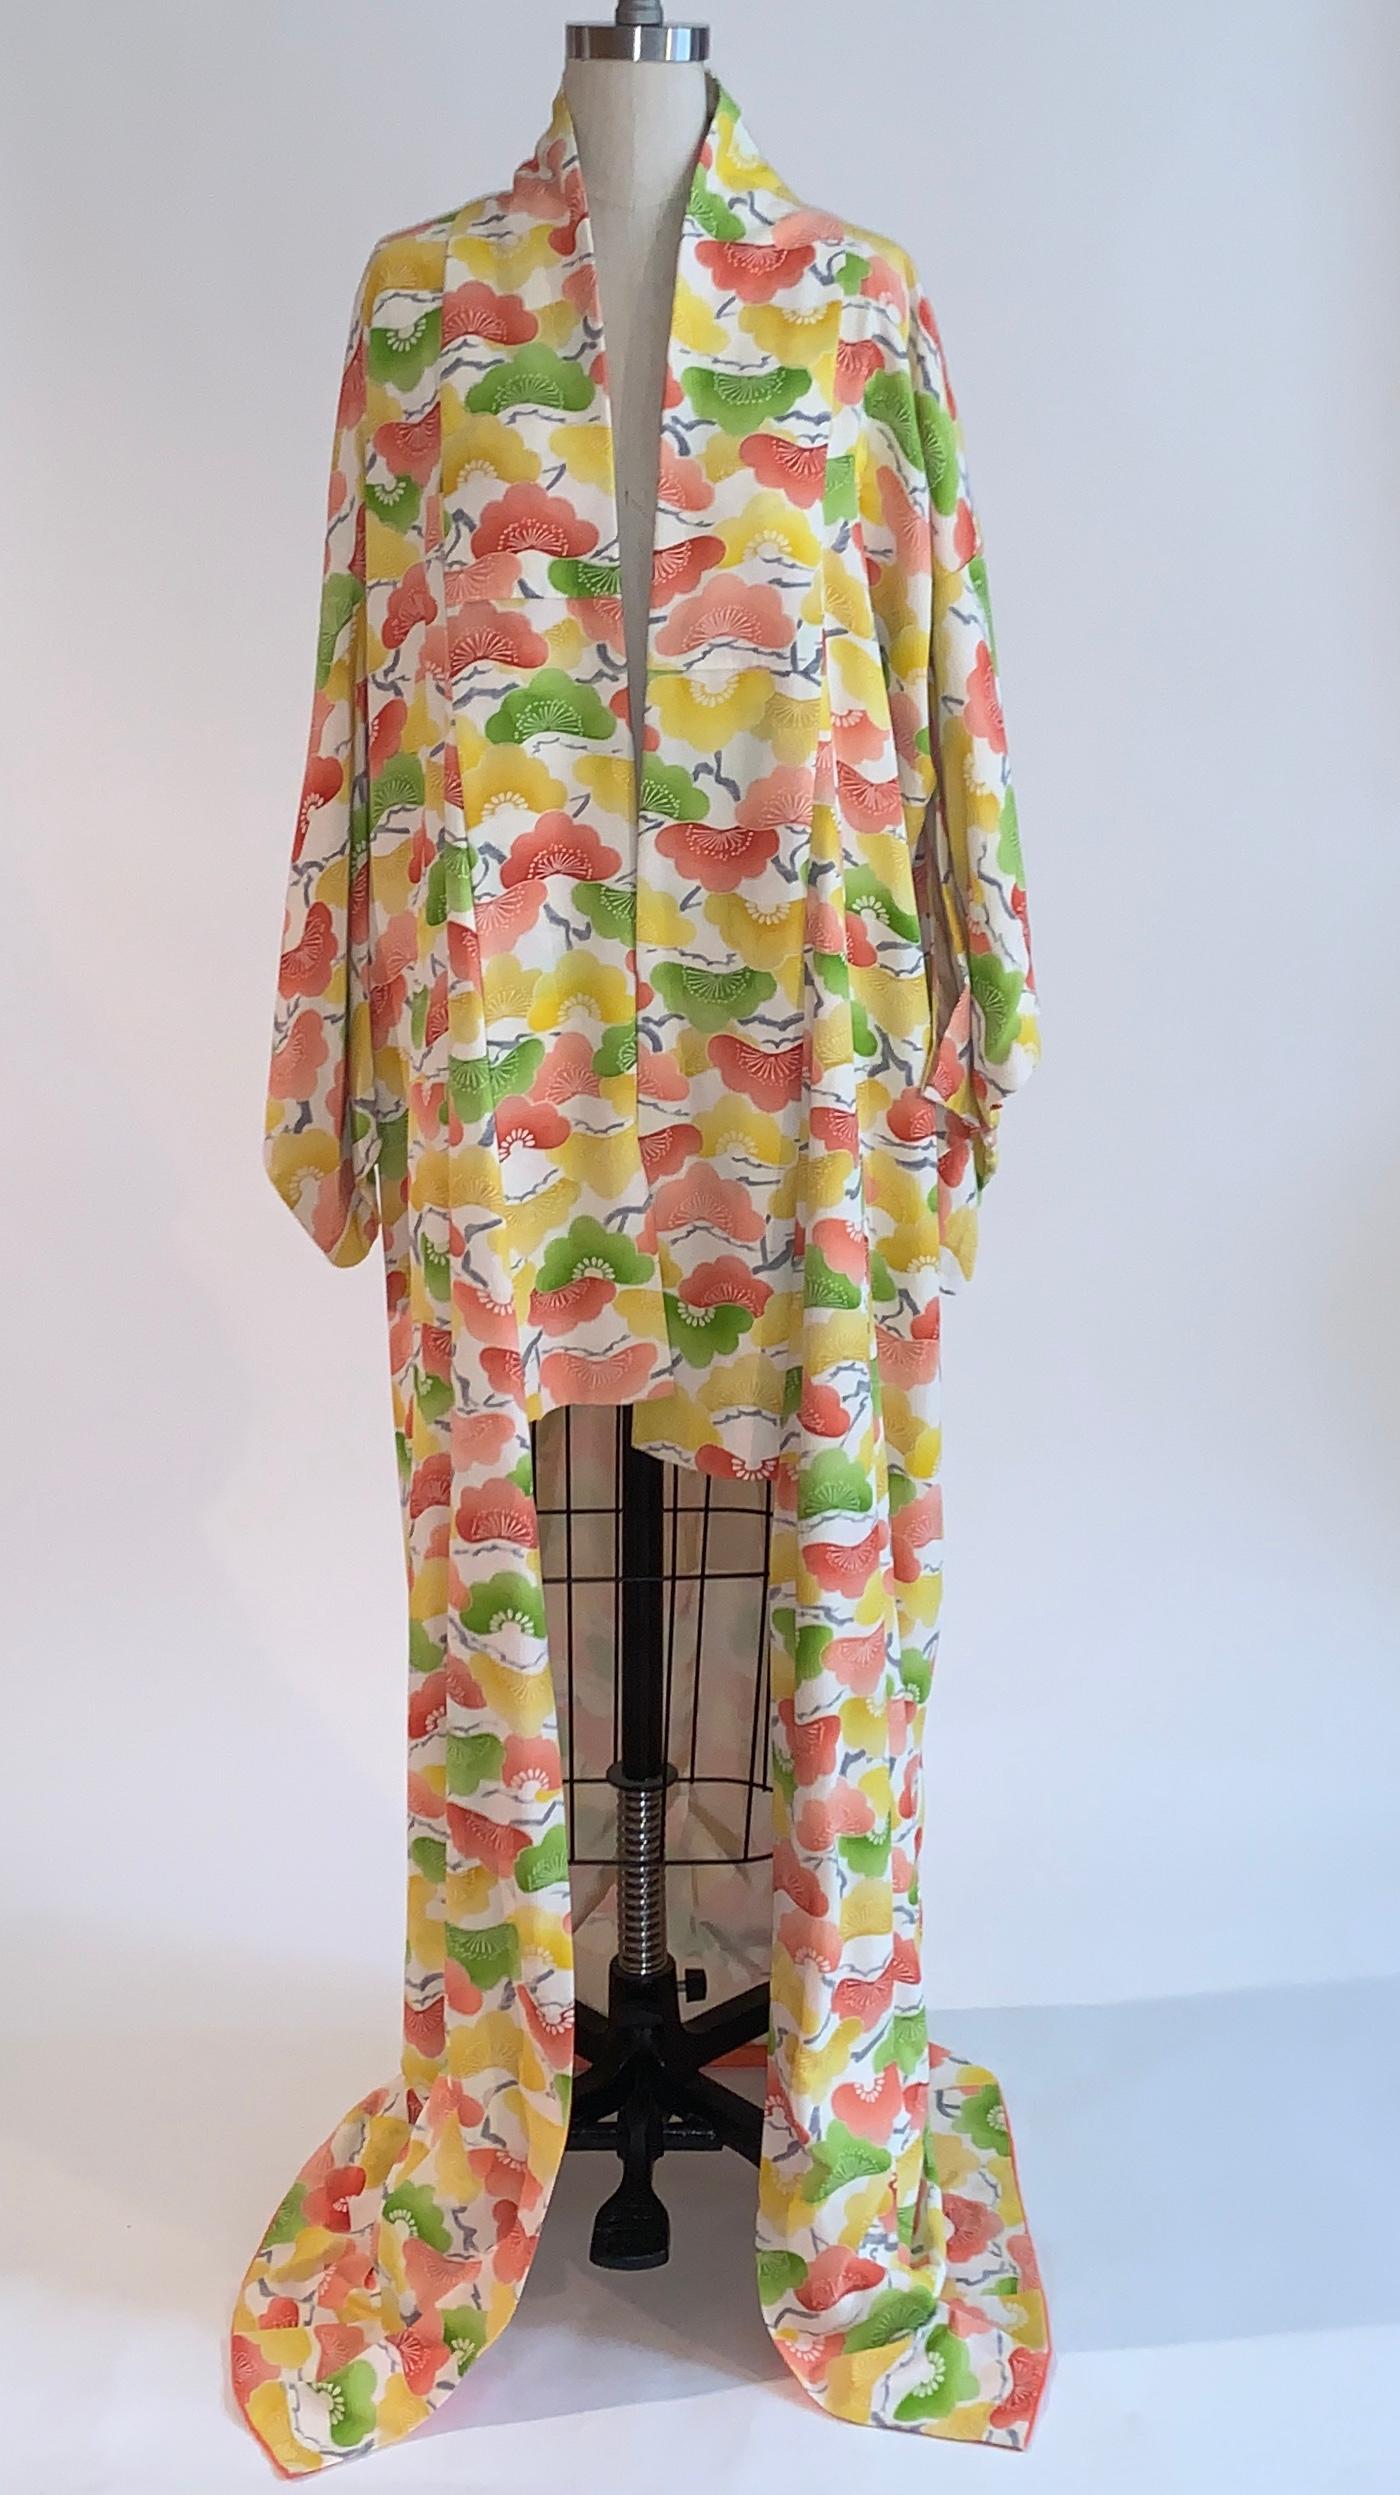 Vintage 1960s or 70s silk jacquard kimono with a cheerful pink, green, and yellow print that looks like abstract fans or florals. Vibrant pink dip dyed silk lining at interior bottom. Great with a t-shirt, wedges, and slim jeans. 

One size. 

Good